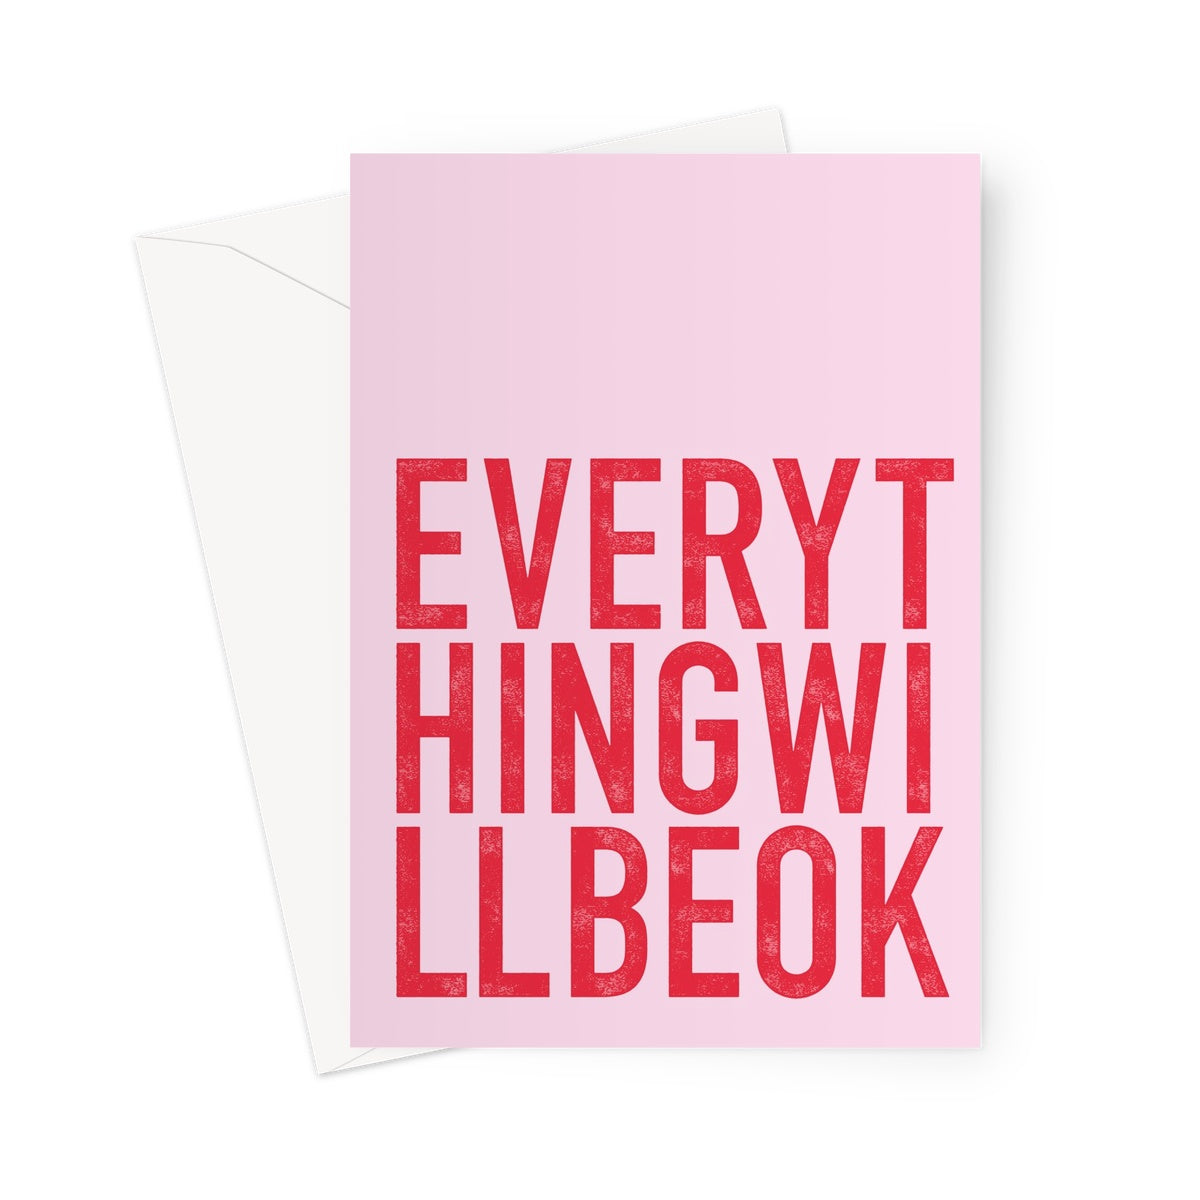 EVERYTHING WILL BE OK - Pink/Red Greeting Card